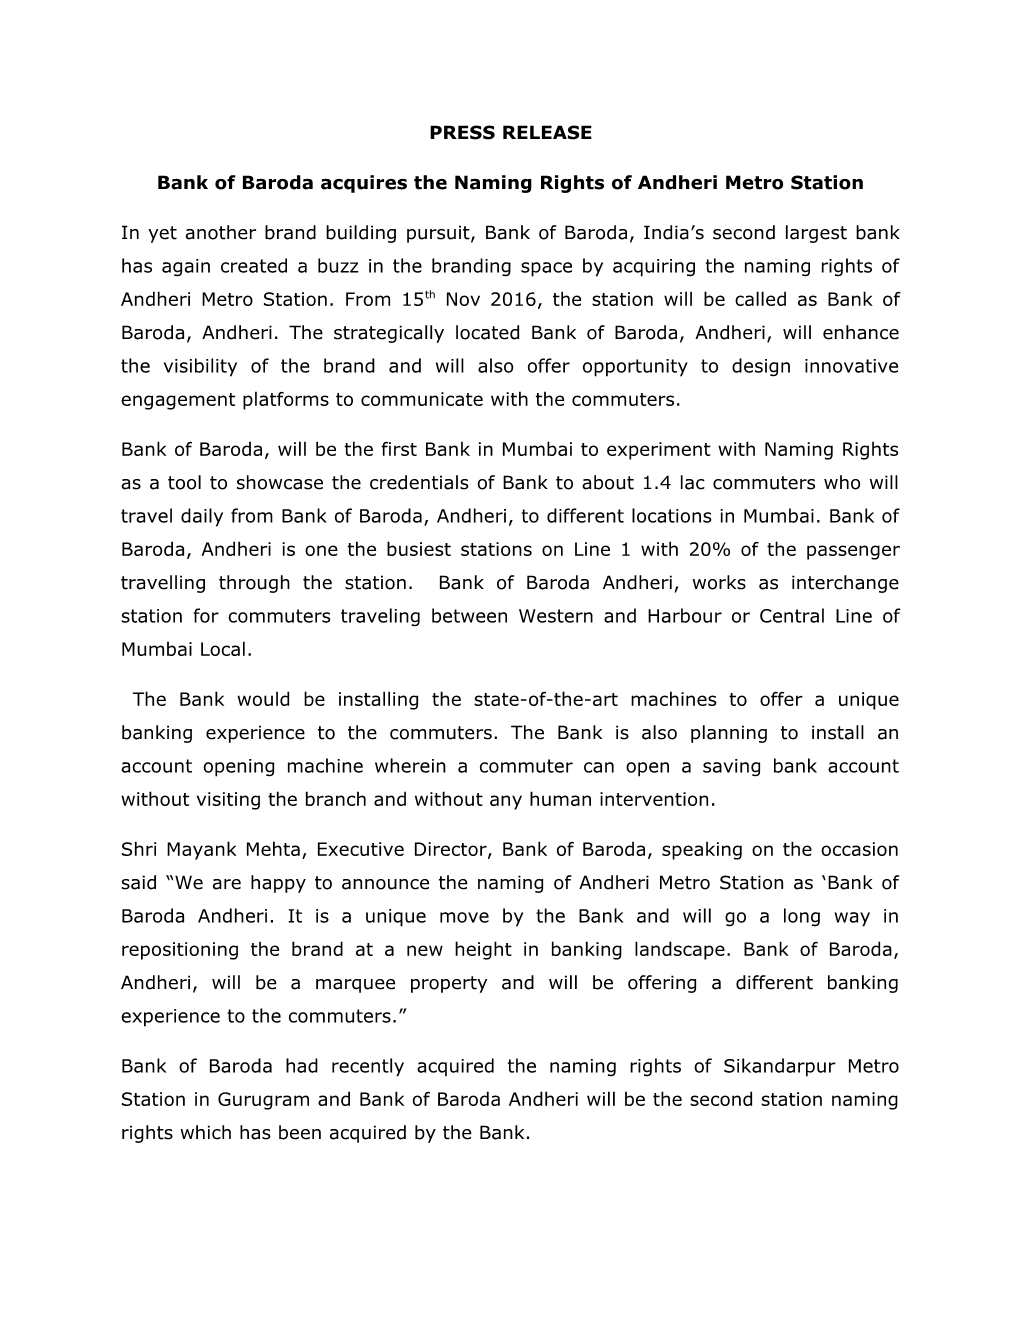 PRESS RELEASE Bank of Baroda Acquires the Naming Rights Of